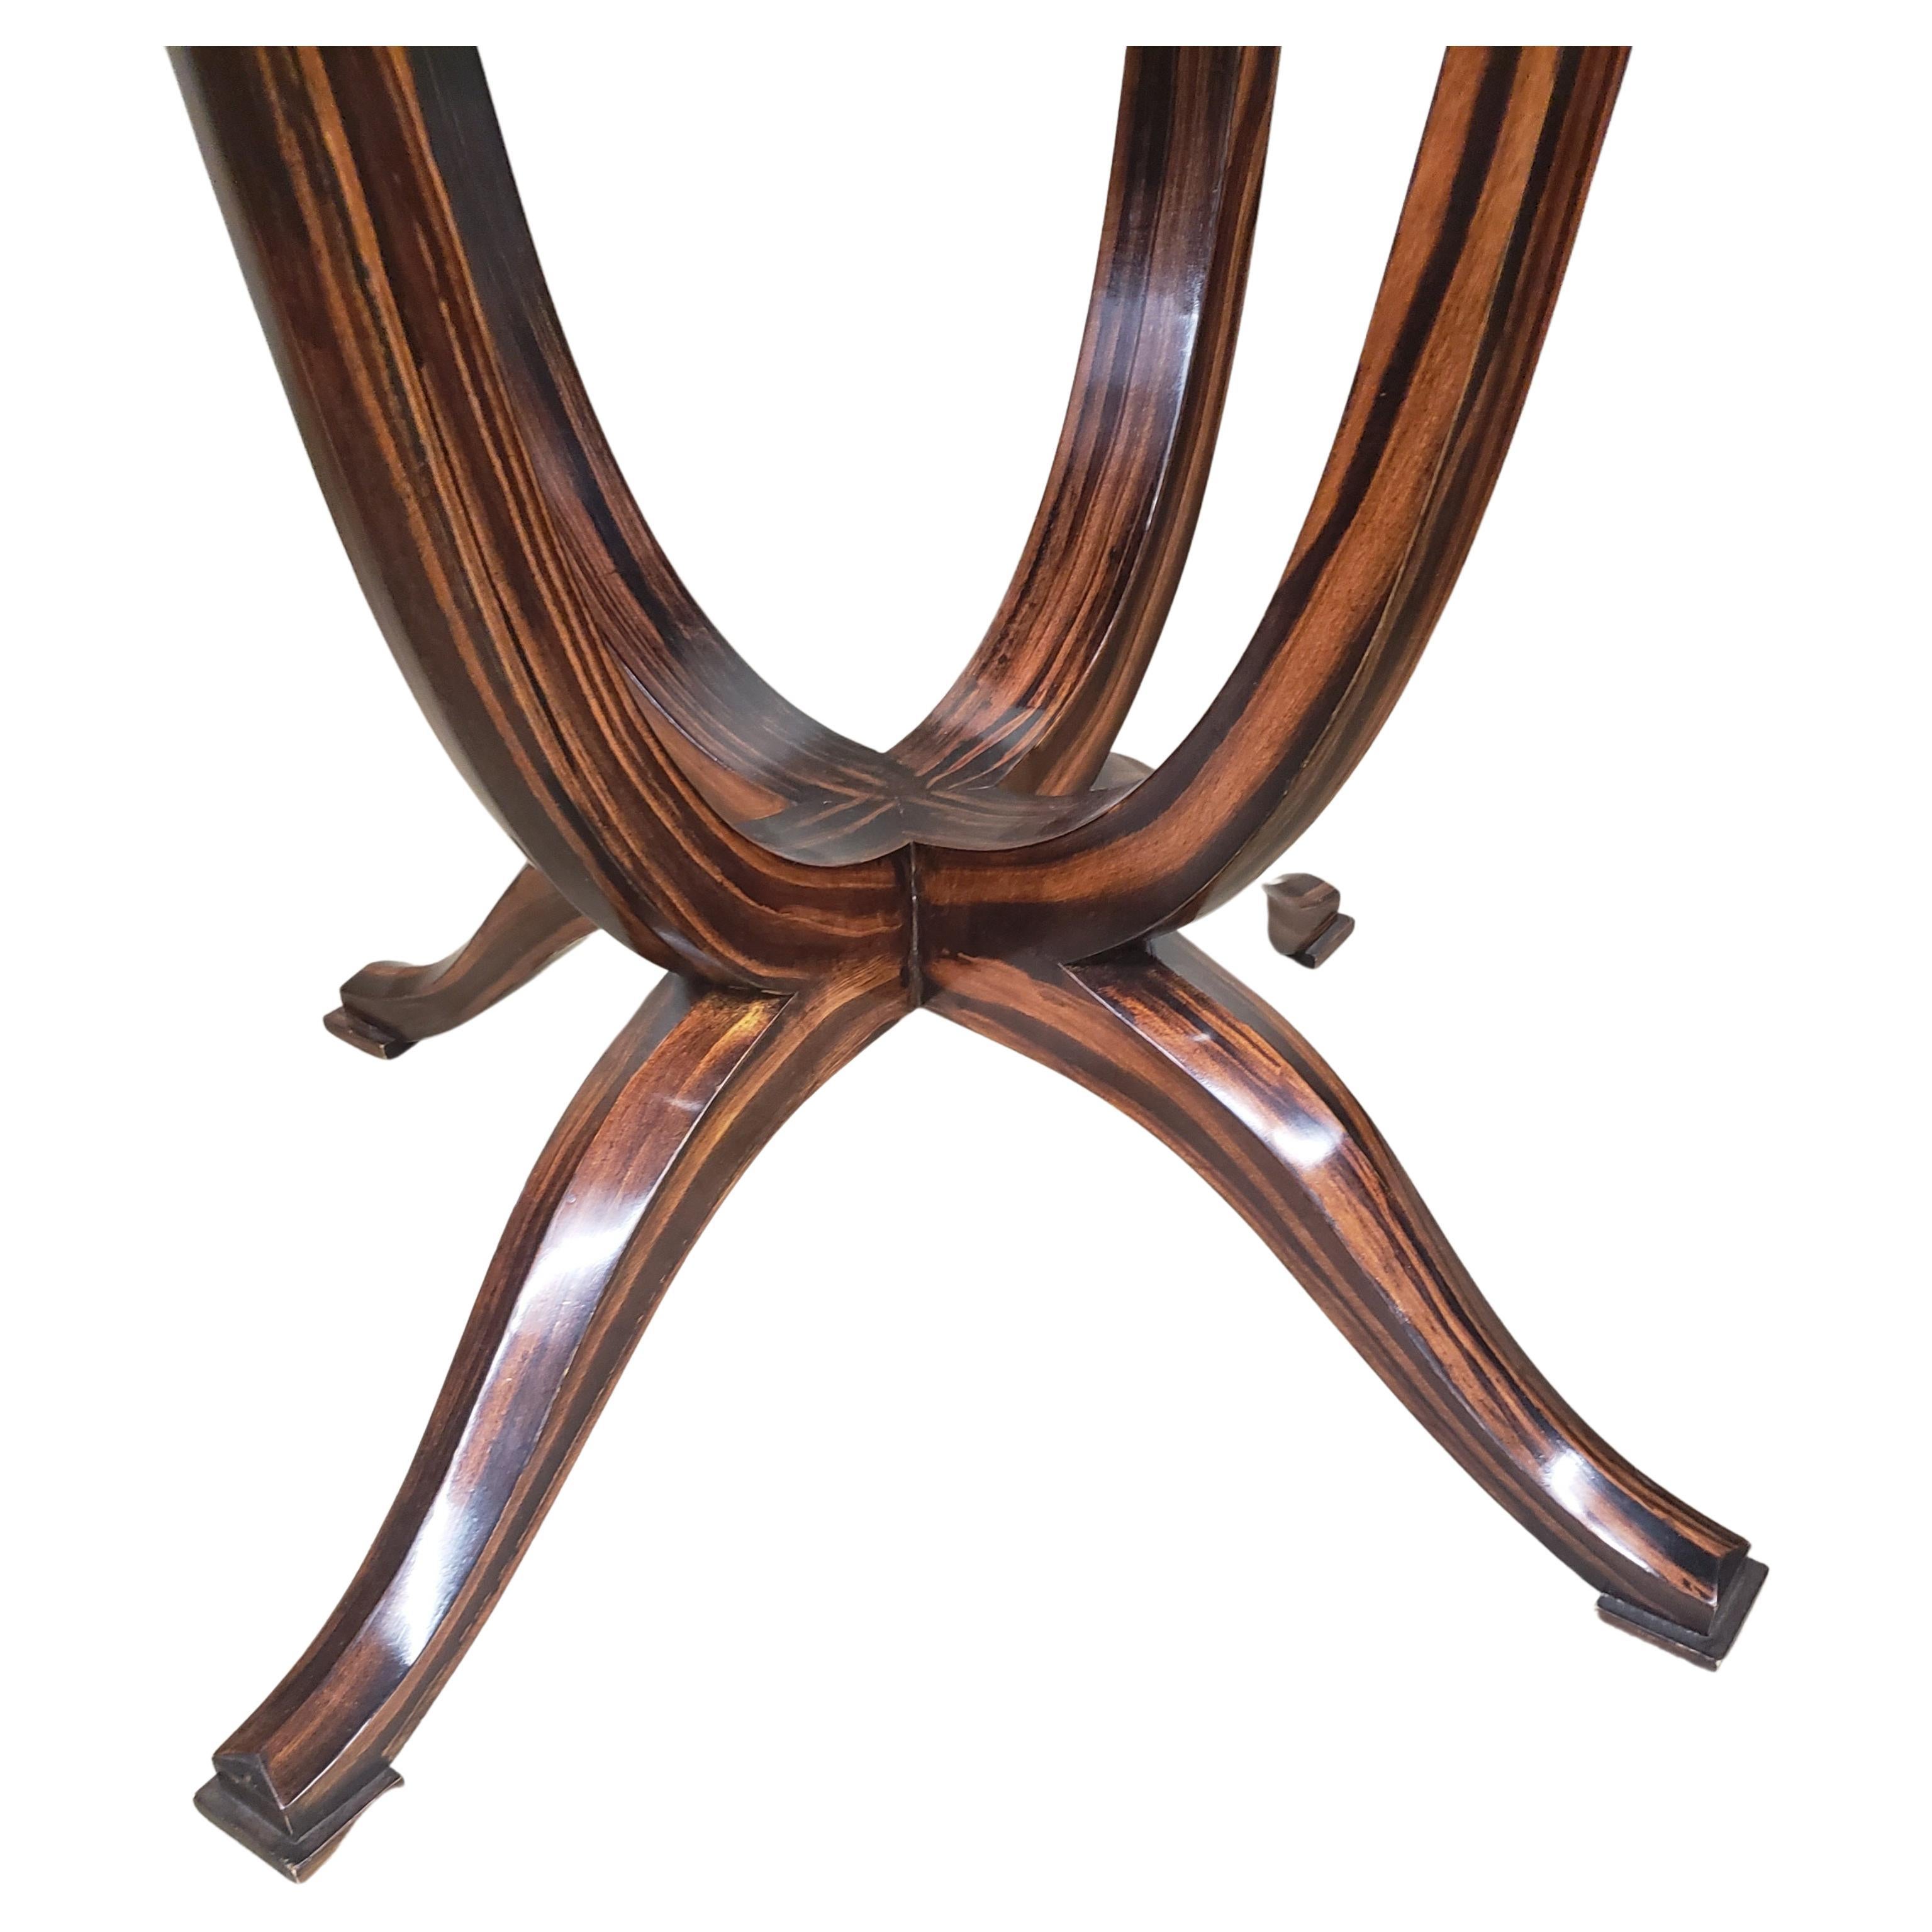 20th Century Art Deco Style Rosewood Center Table